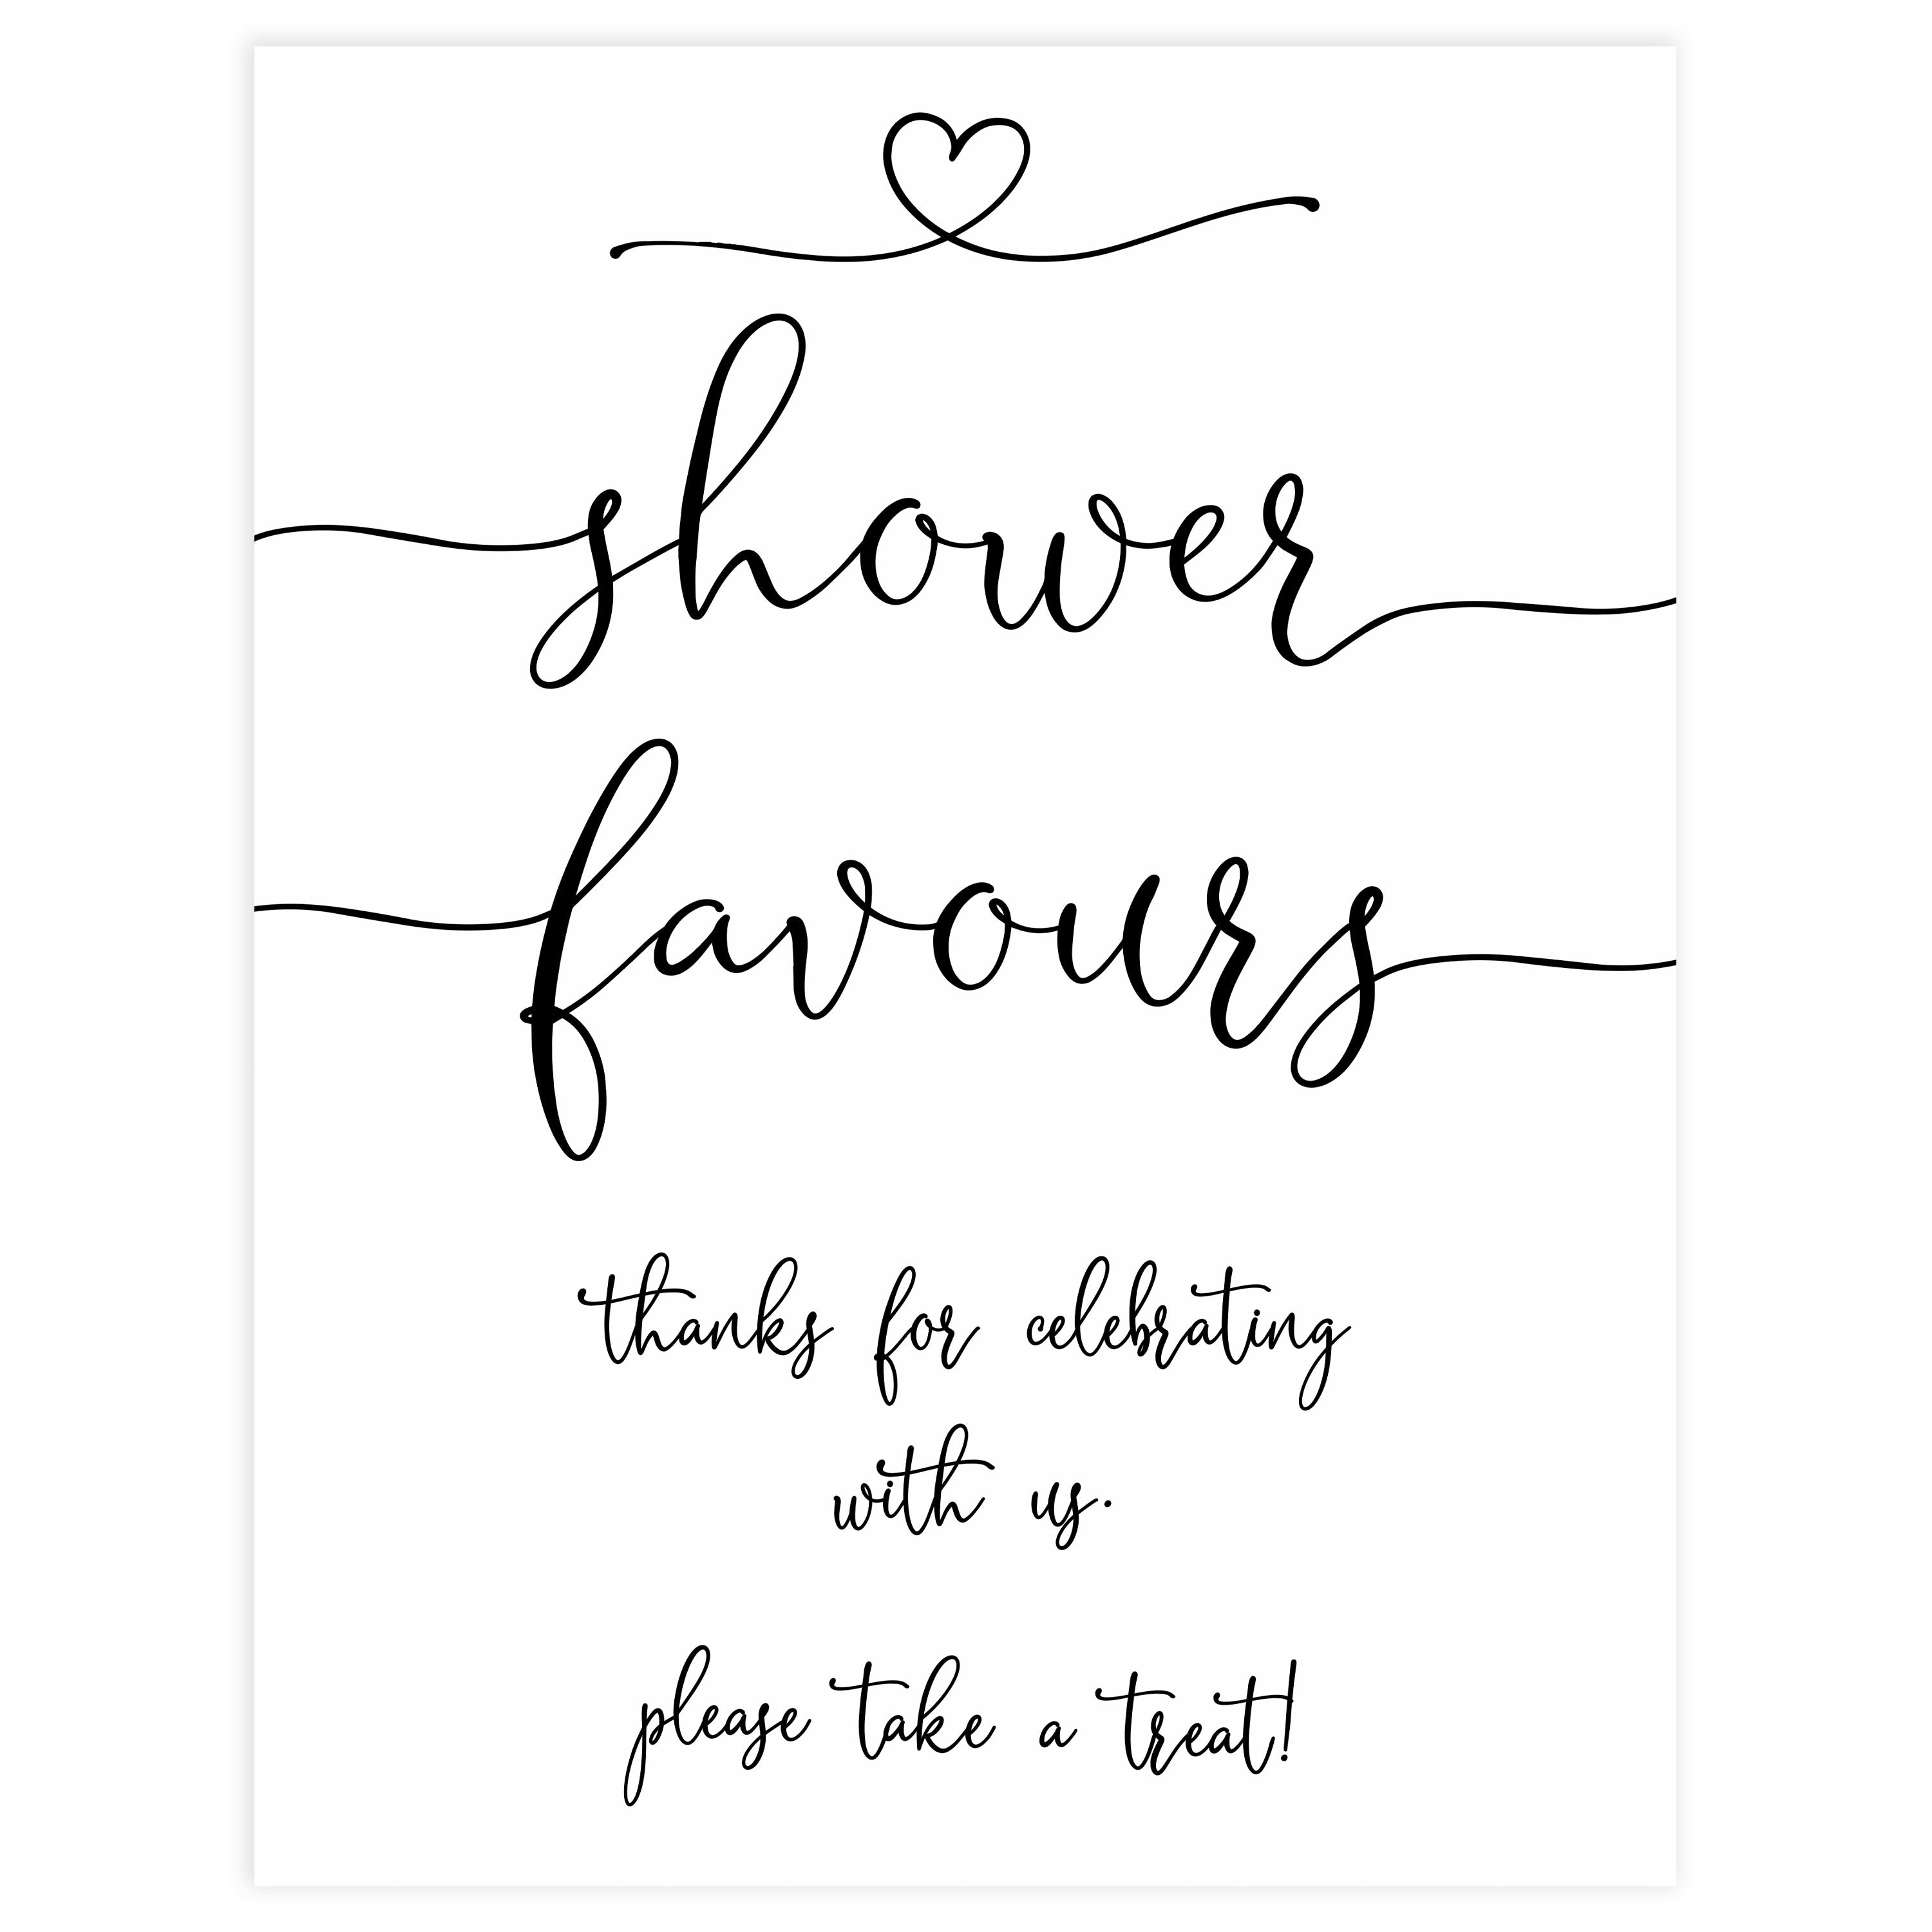 Favors Sign - Boho Printable Baby Shower Signs – OhHappyPrintables